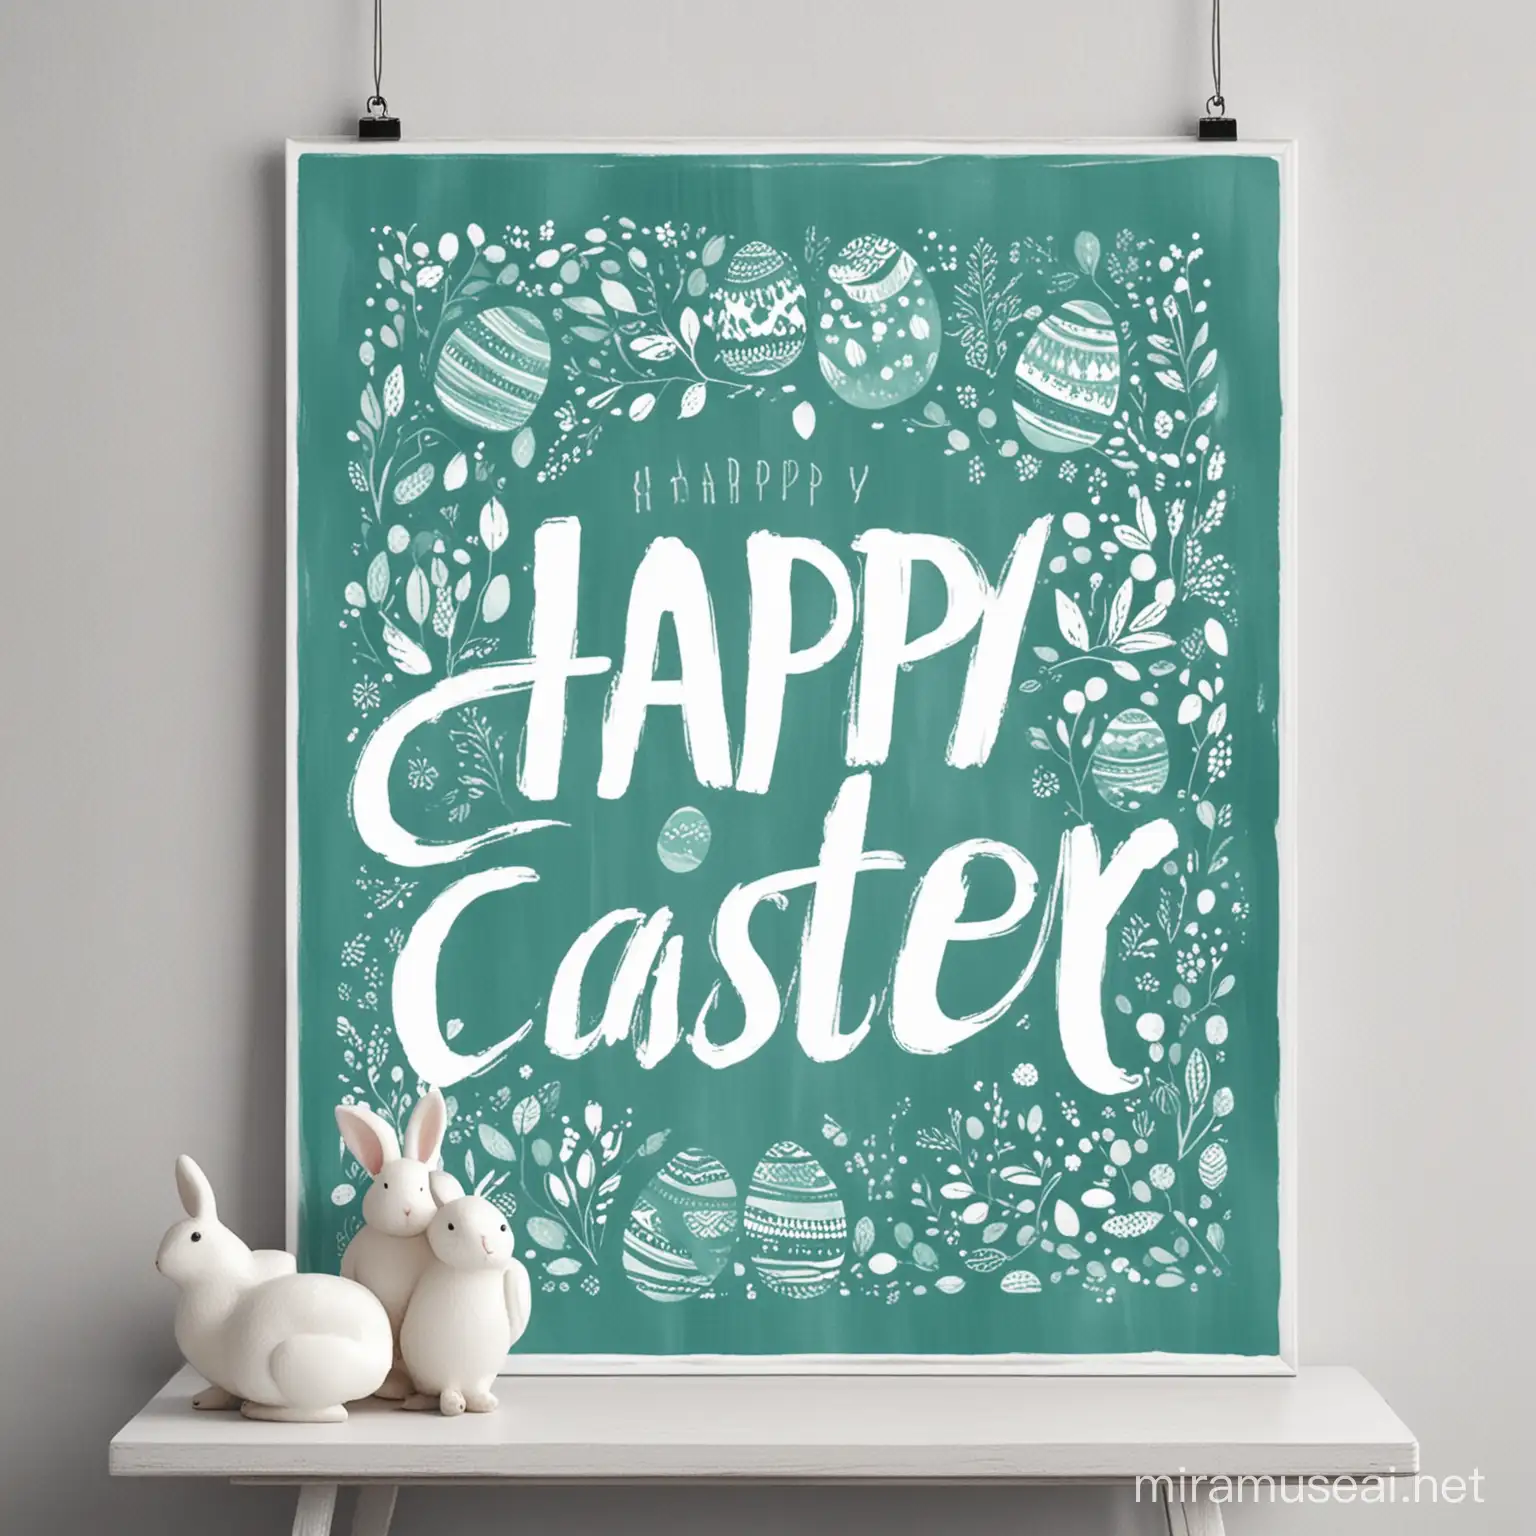 Cheerful Easter Poster Featuring Teal Green and White Palette